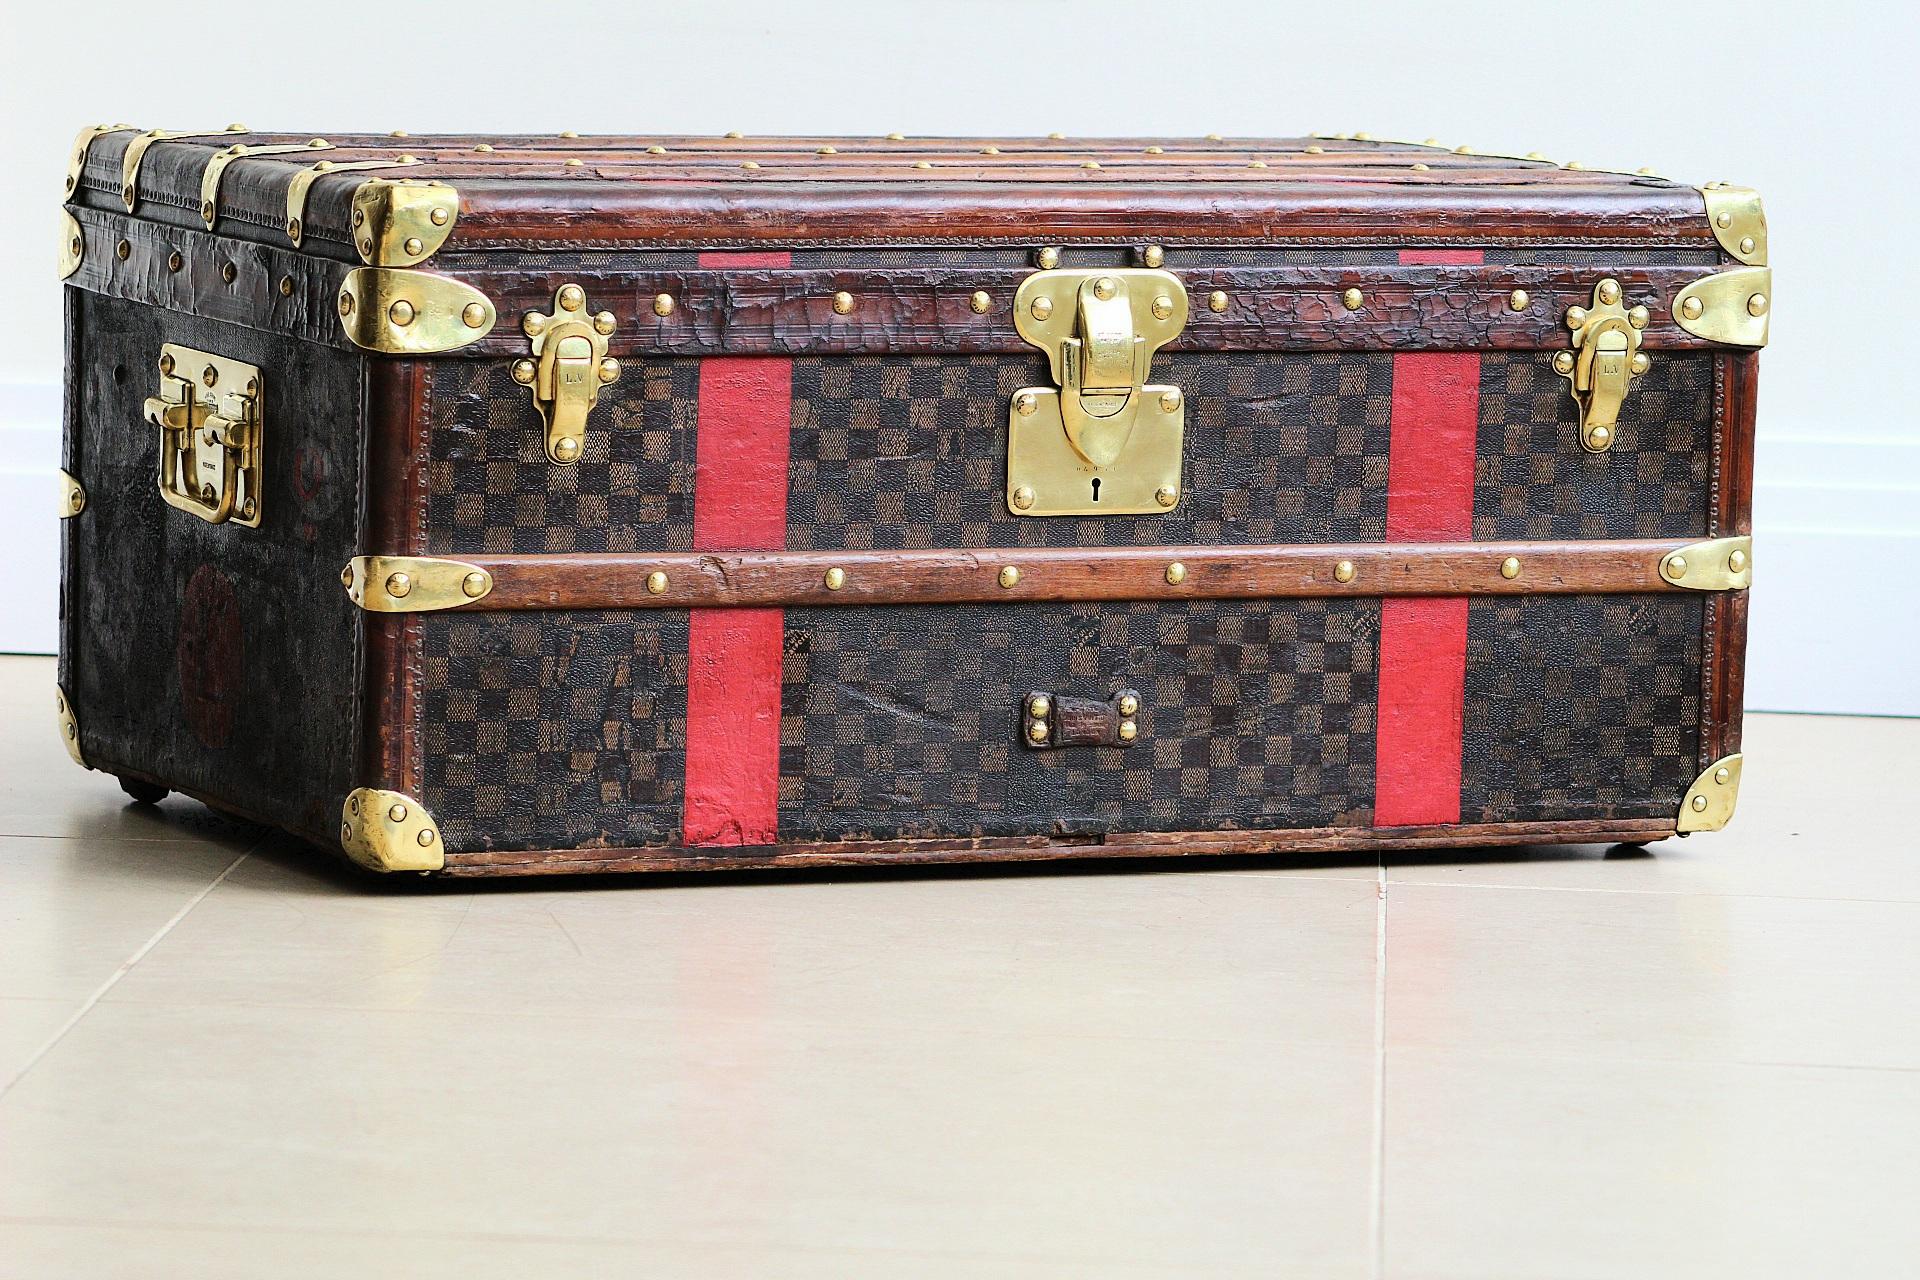 Immerse yourself in the allure of timeless luxury with this magnificent Louis Vuitton Cabin Trunk, a storied piece from the 1880s that radiates the elegance and adventure of a bygone era. This exquisite trunk, crafted during the golden age of